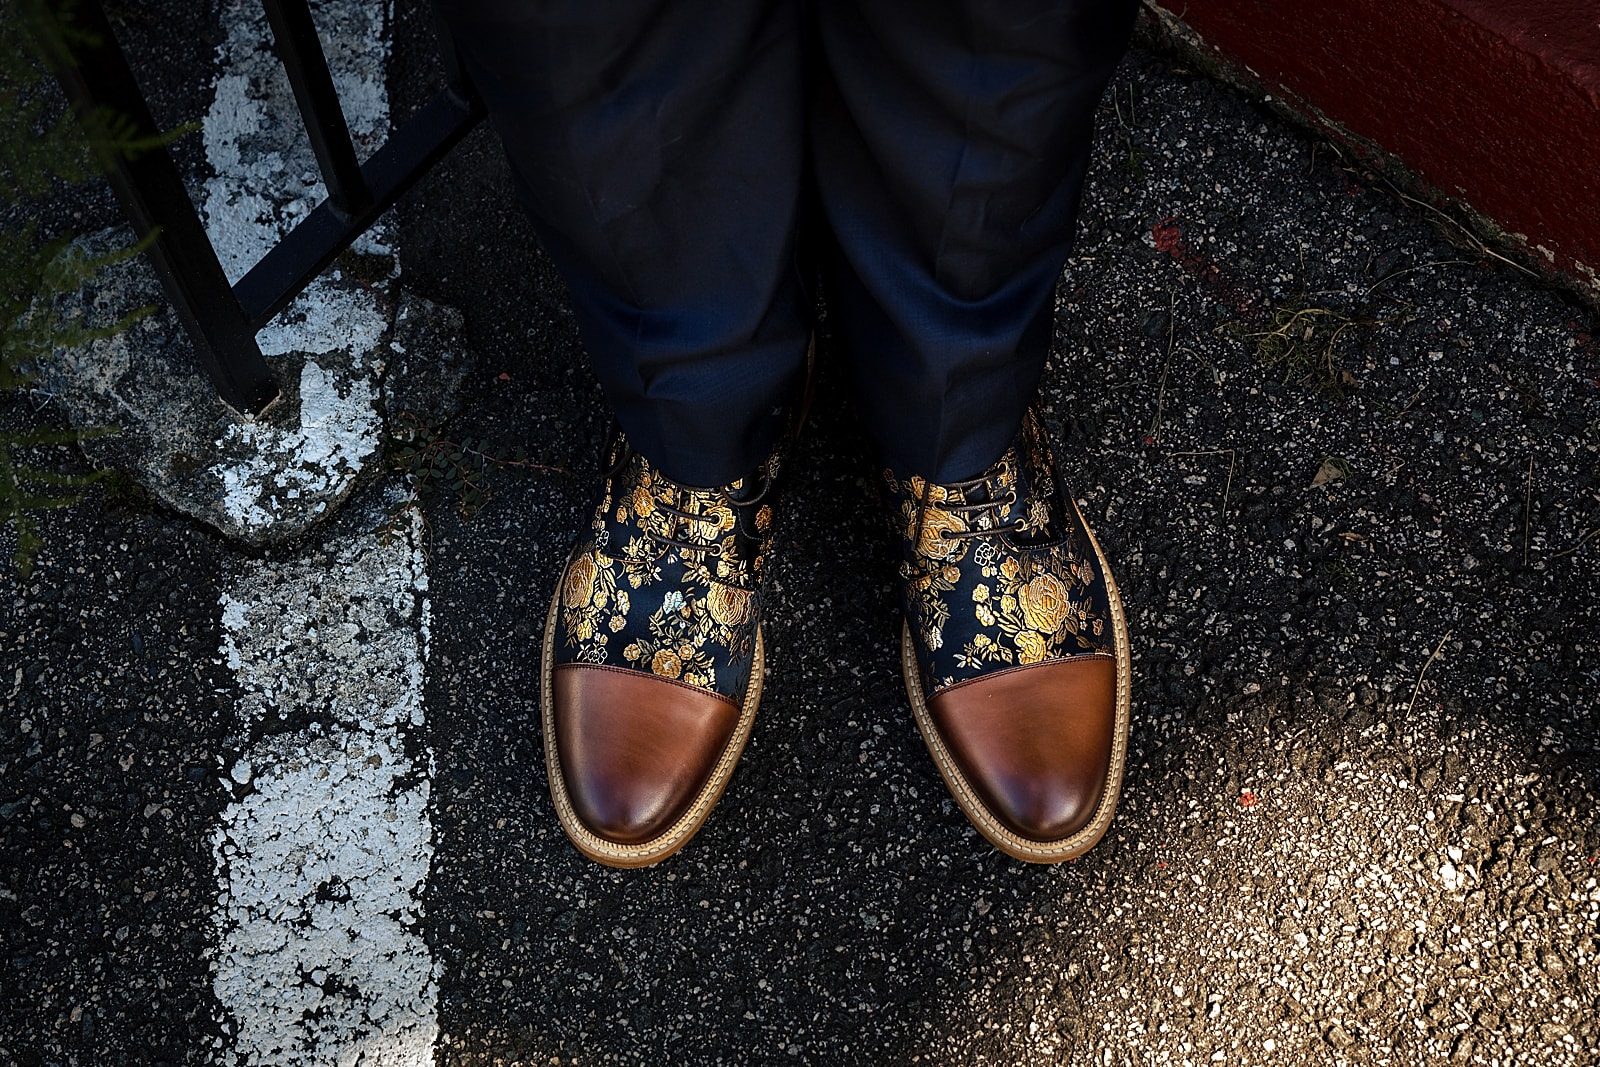 groom style inspiration - cool shoes